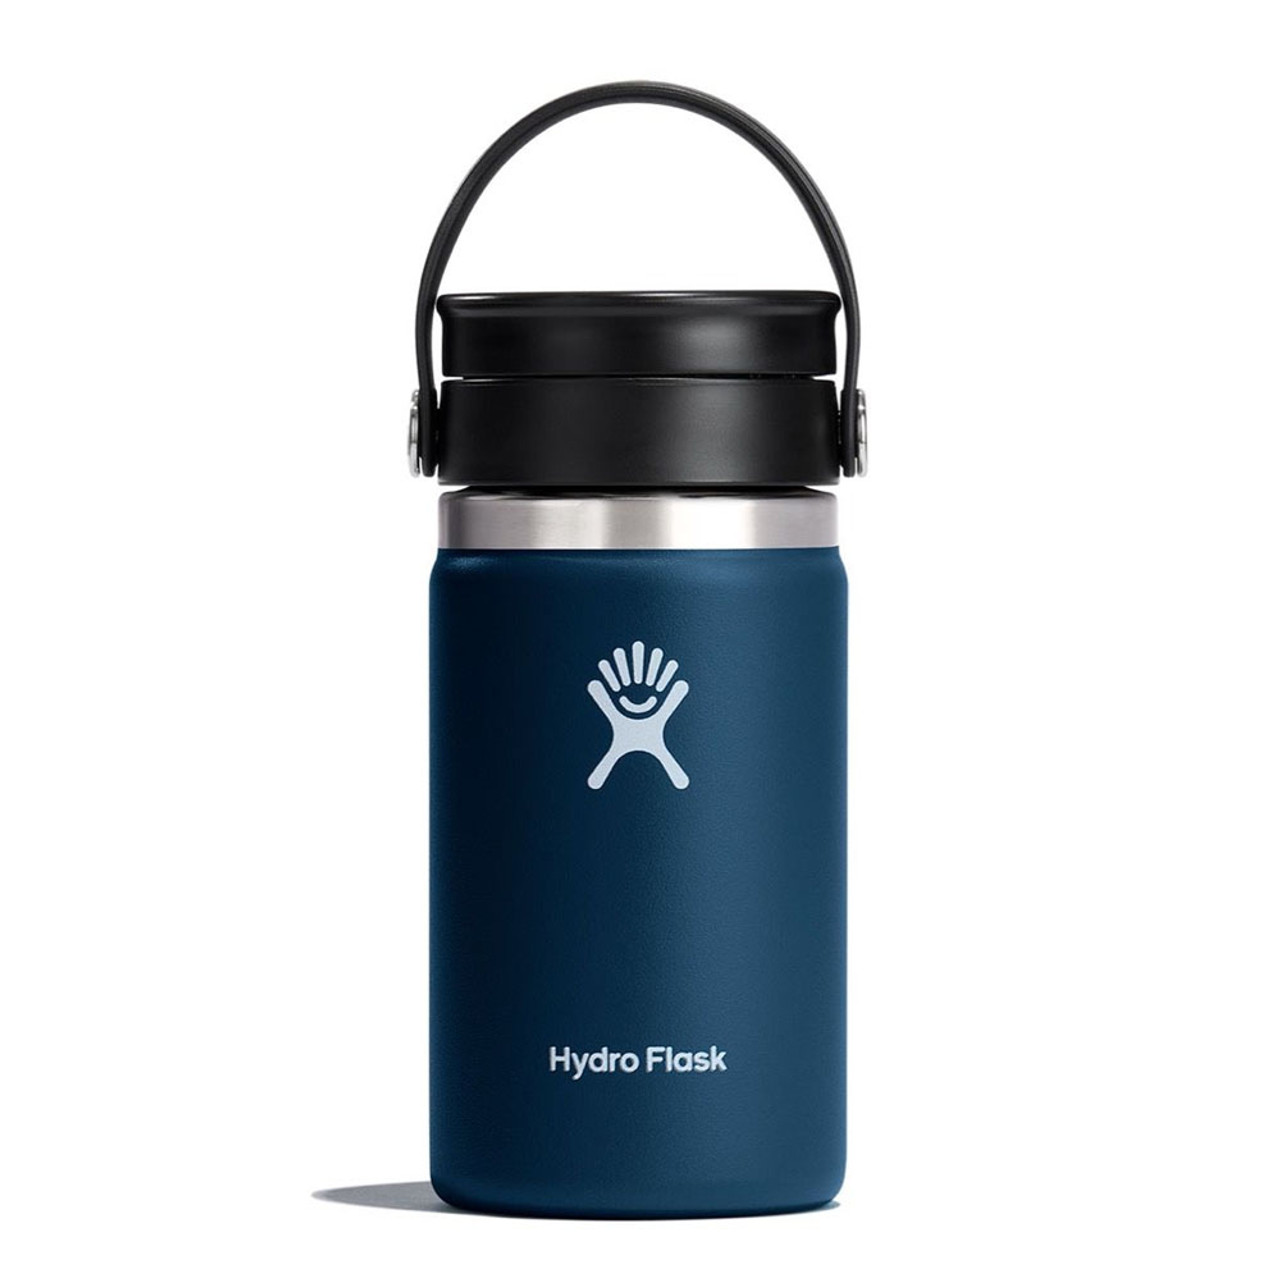 https://cdn11.bigcommerce.com/s-p4e2op94ll/images/stencil/1280x1280/products/2890/15761/Hydroflask_12_ounce_coffee_cup_with_flex_sip_lid_indigo__05232.1683585695.jpg?c=2?imbypass=on